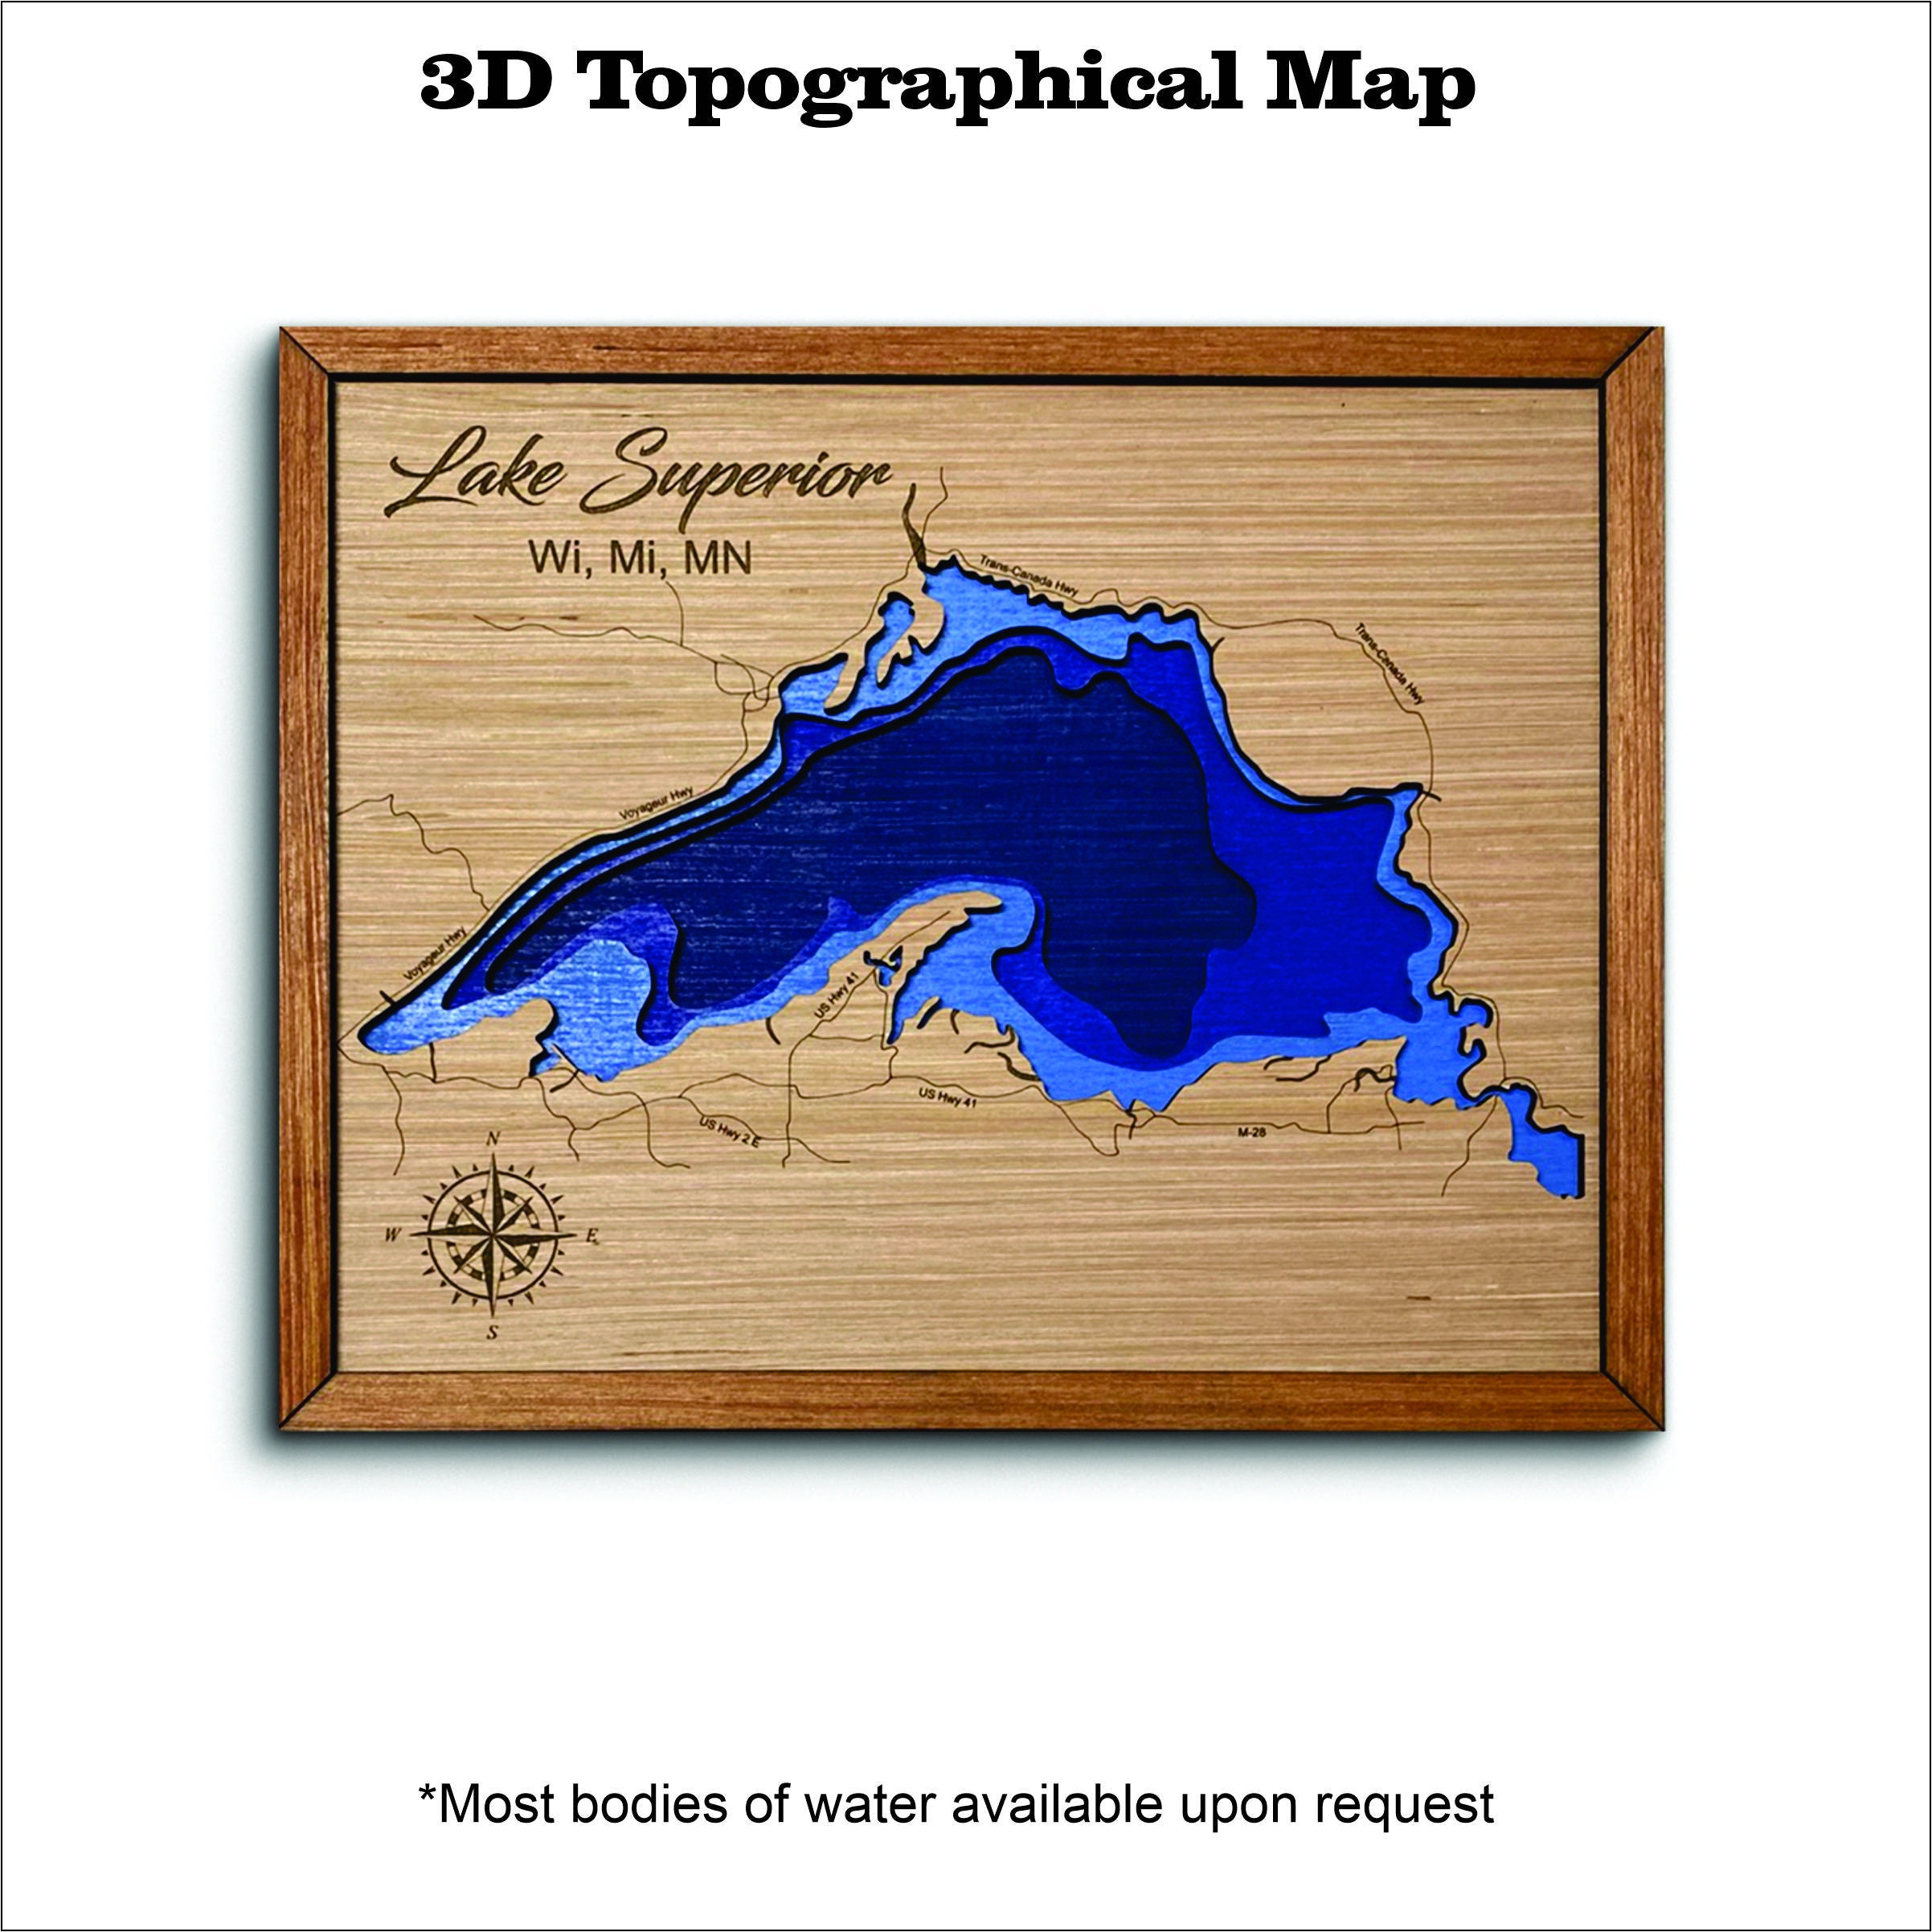 Lake Superior 3D Topographical